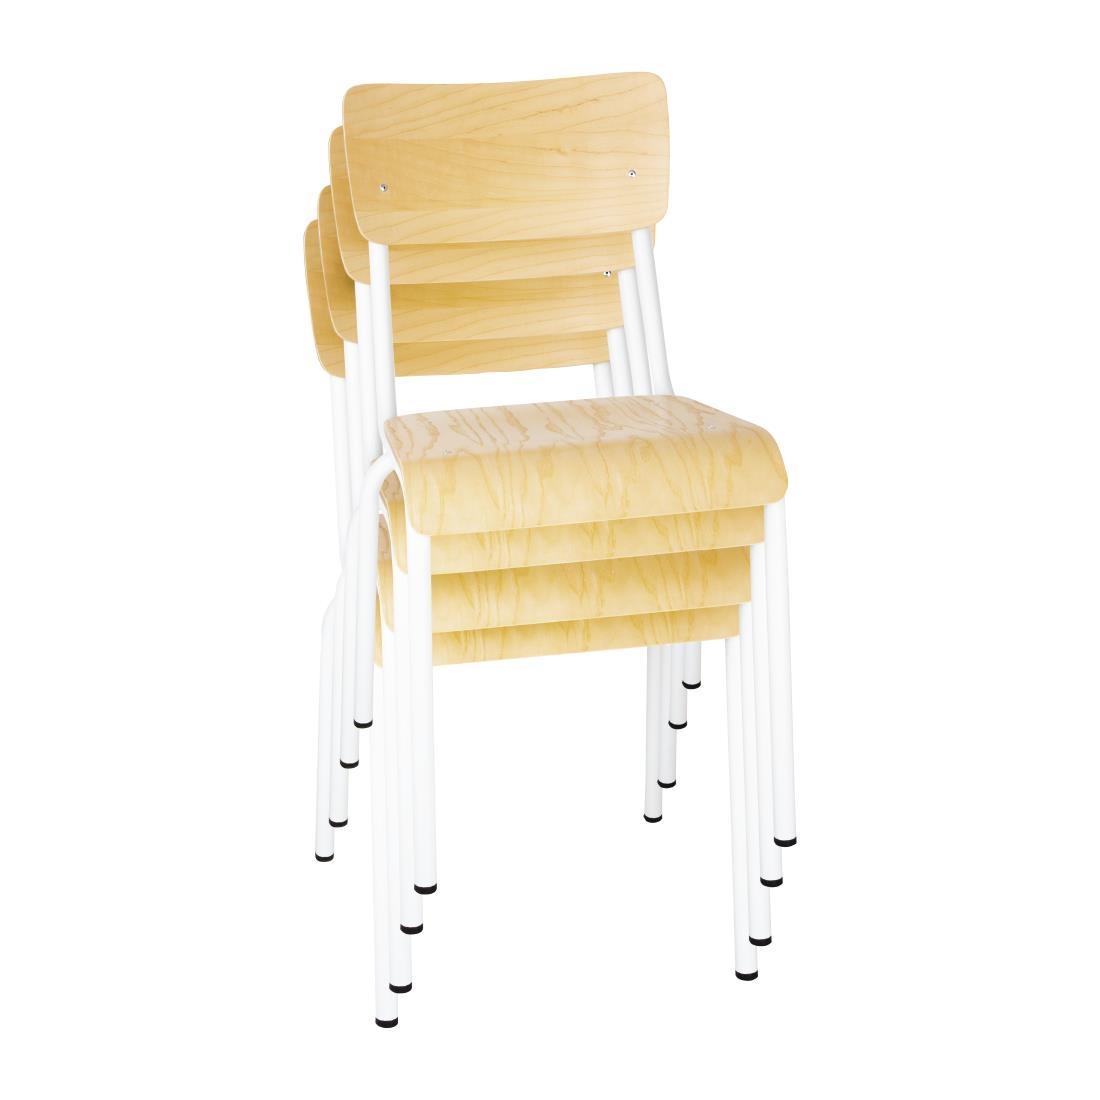 Bolero Cantina Side Chairs with Wooden Seat Pad and Backrest White (Pack of 4) - FB945  - 5